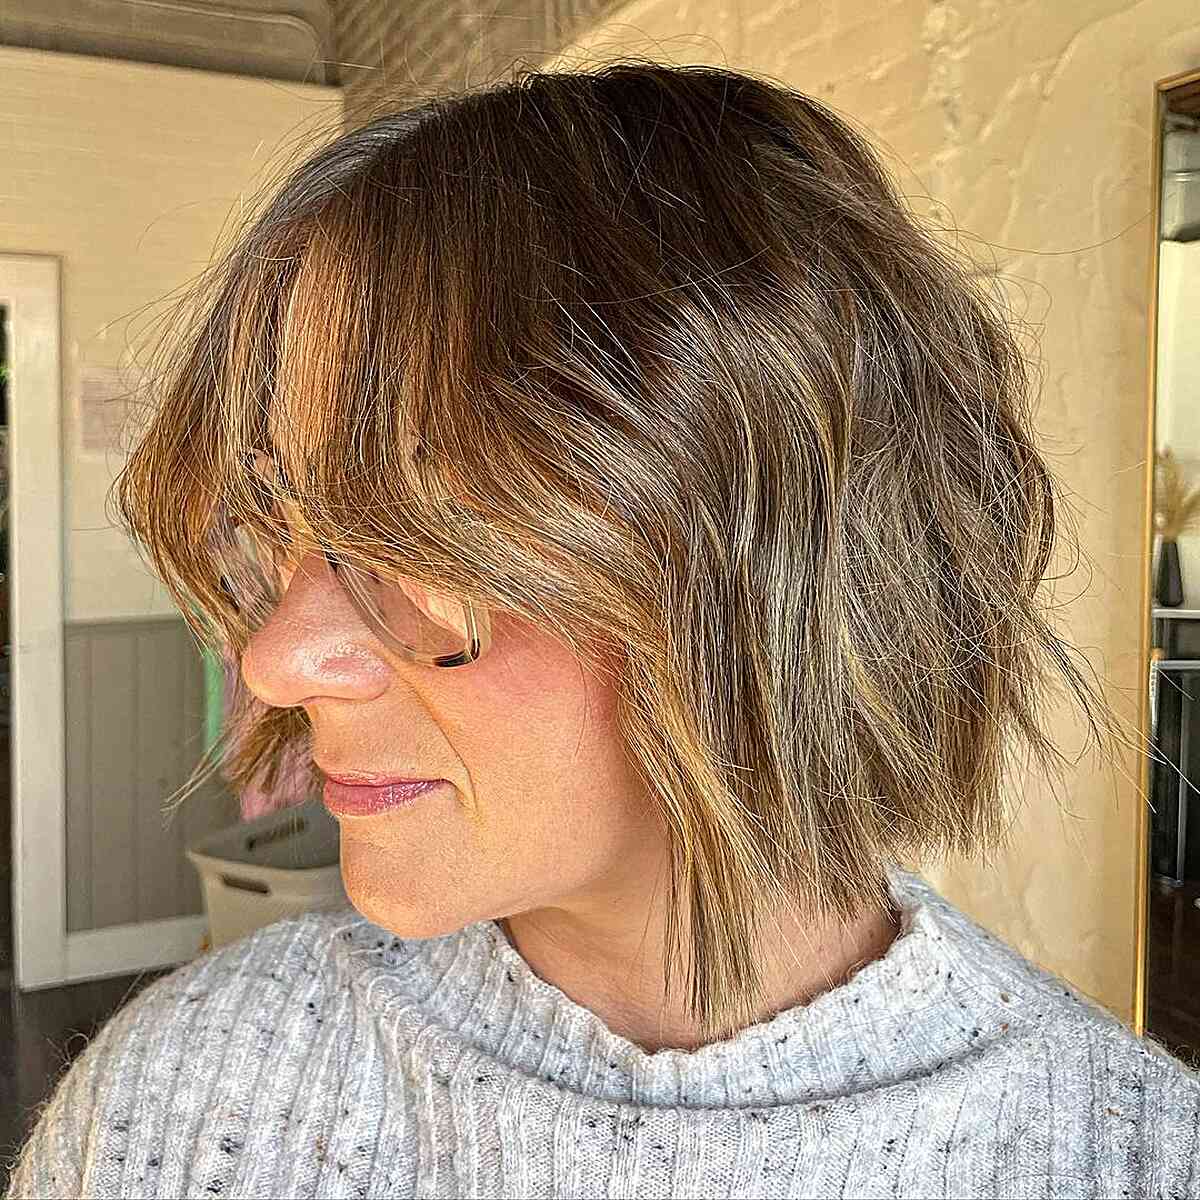 Chin-Length Soft Tousled Bob with Textured Ends on 40-year-old Ladies